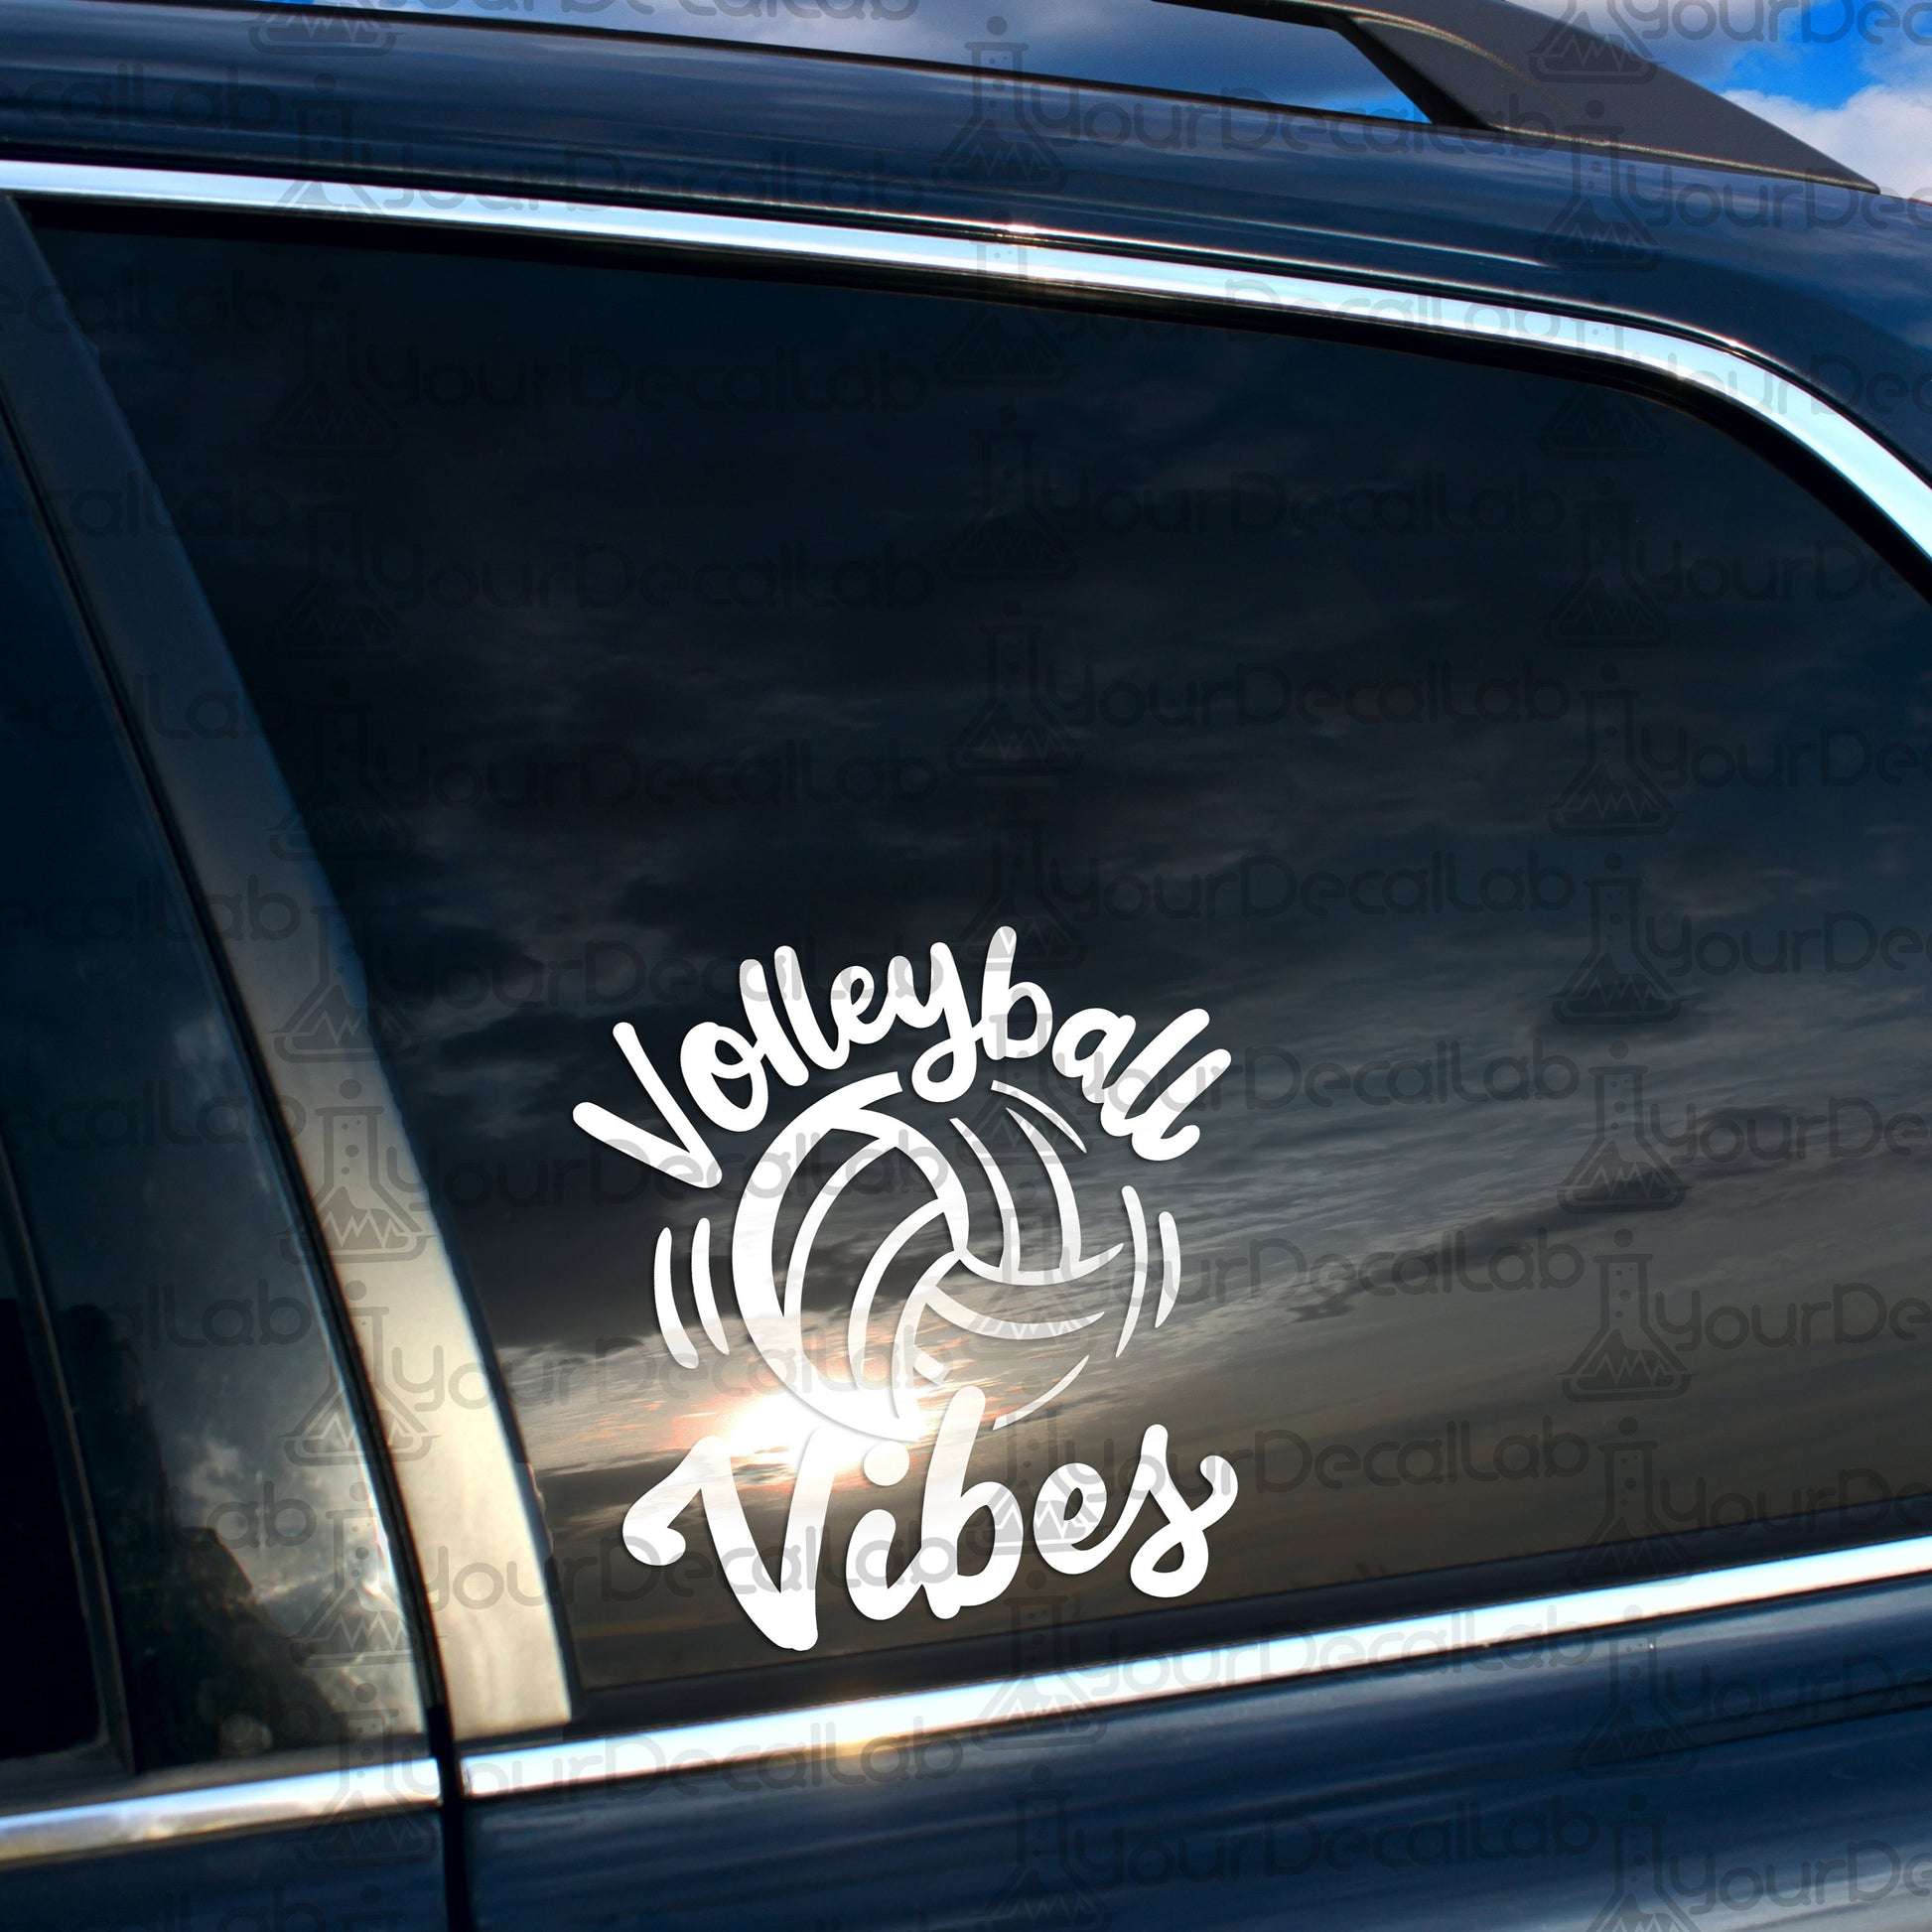 volleyball vibes sticker on the side of a car